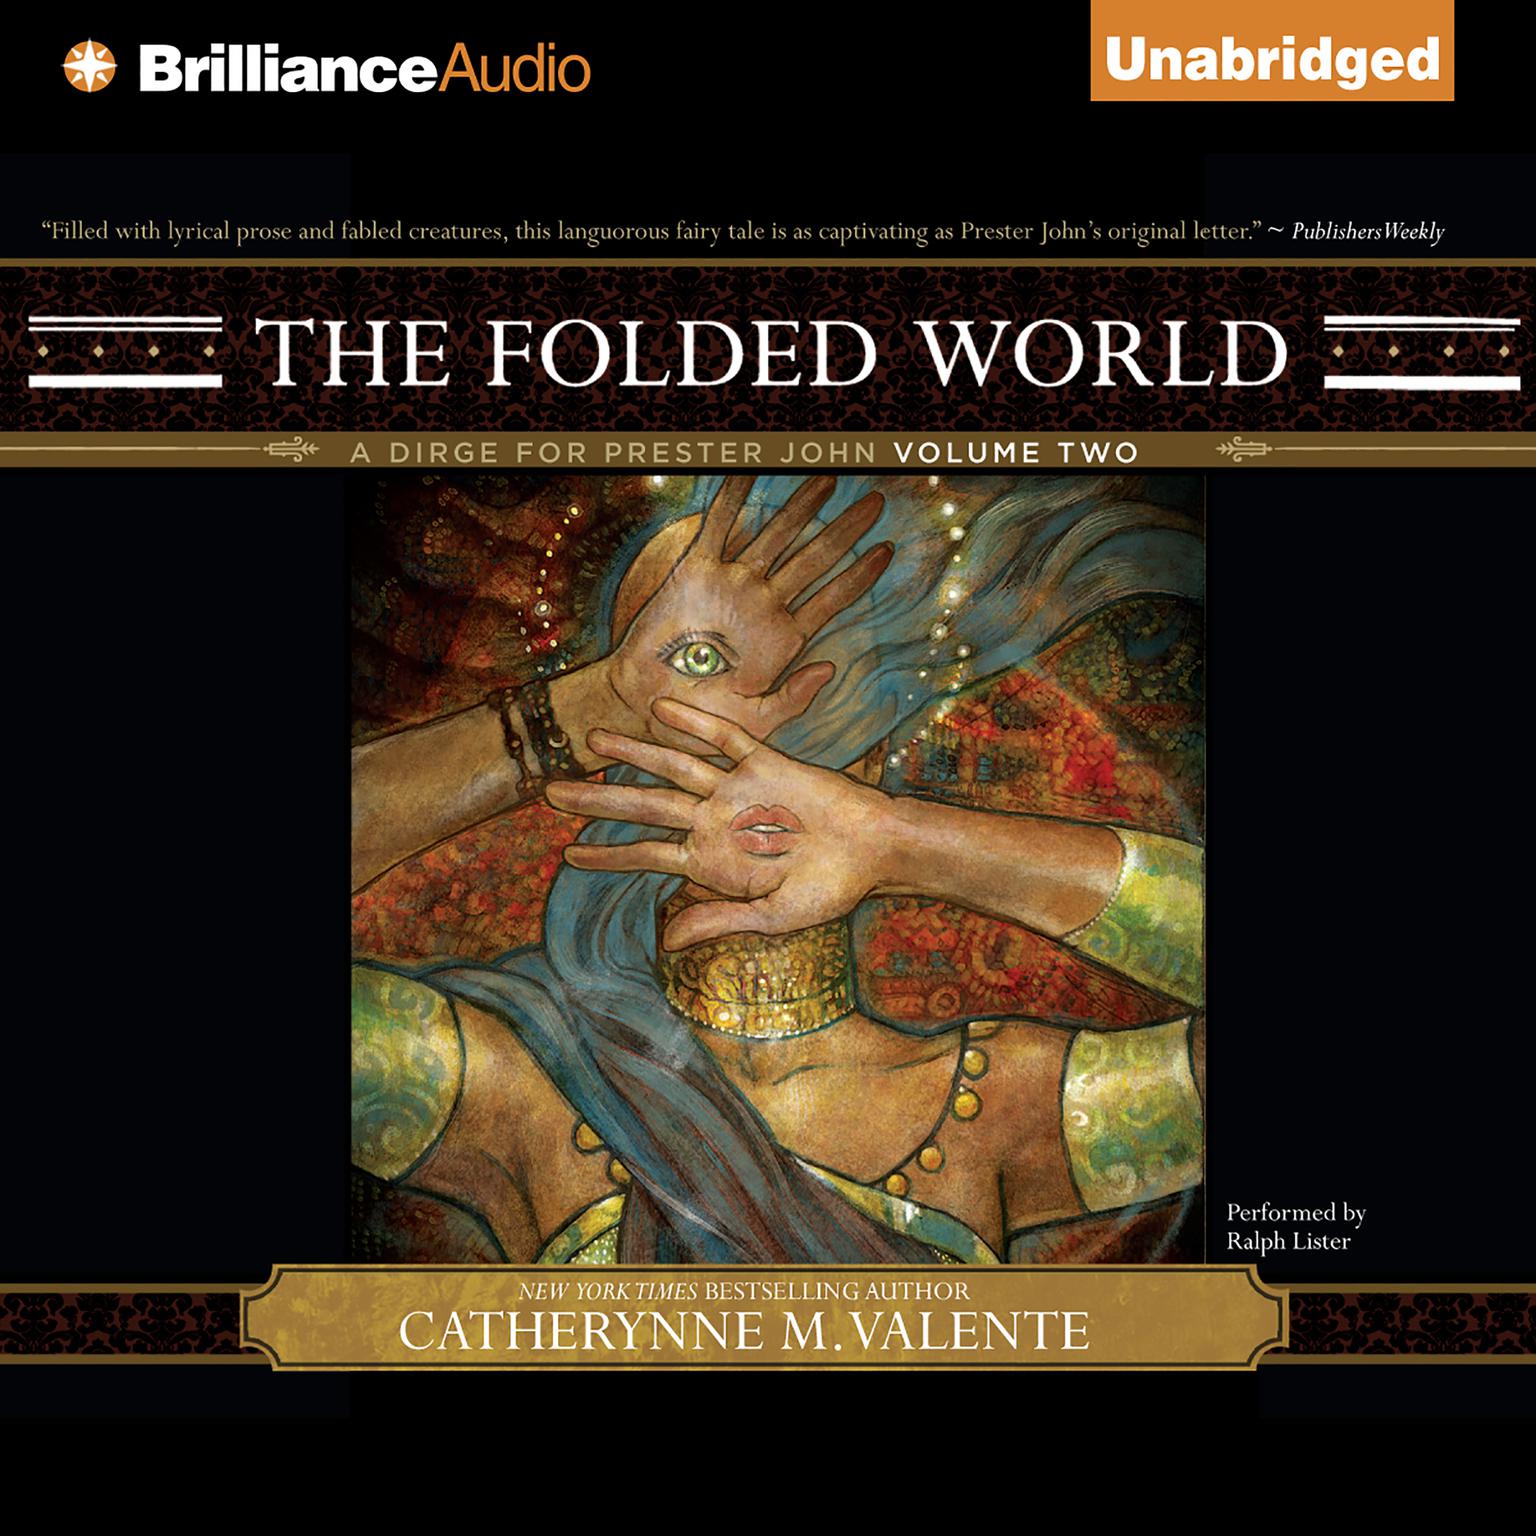 The Folded World: A Dirge for Prester John Volume Two Audiobook, by Catherynne M. Valente